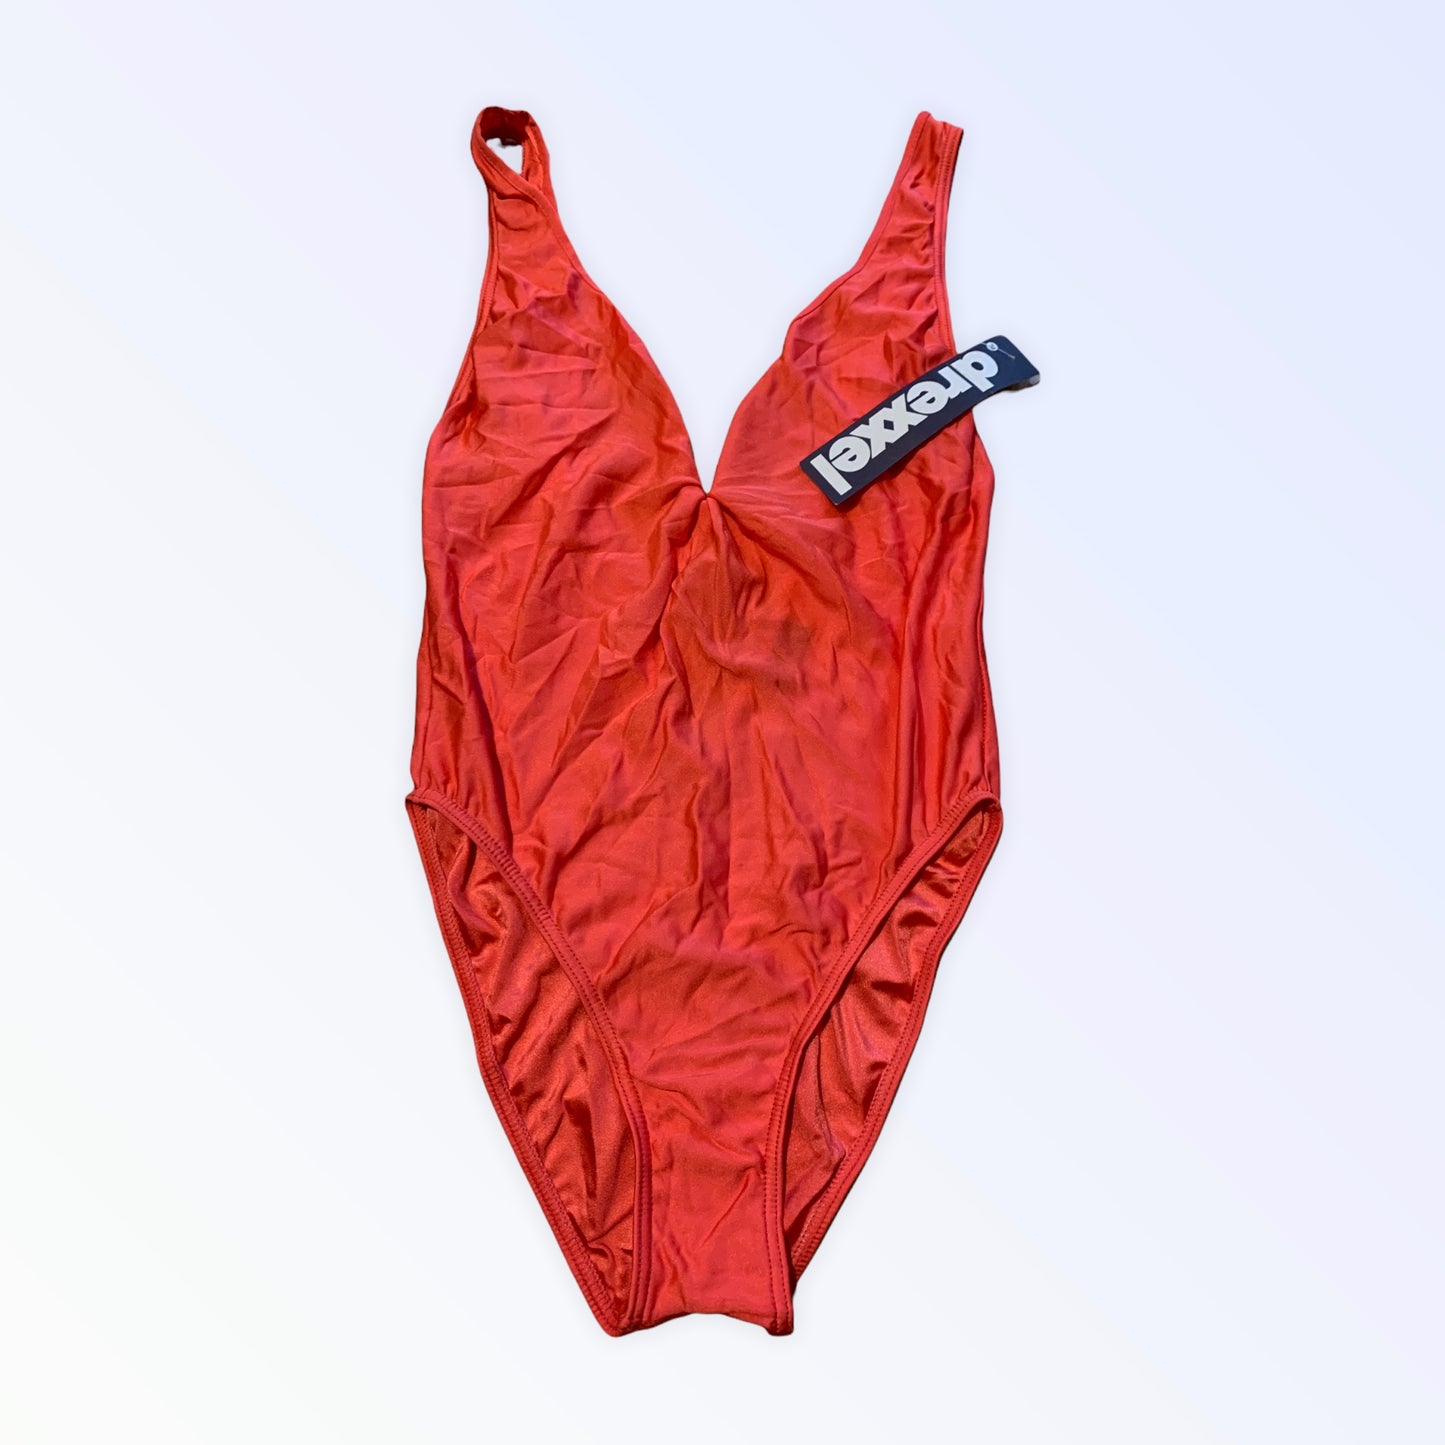 New Vintage Drexxel women's one-piece swimsuit S swimming pool